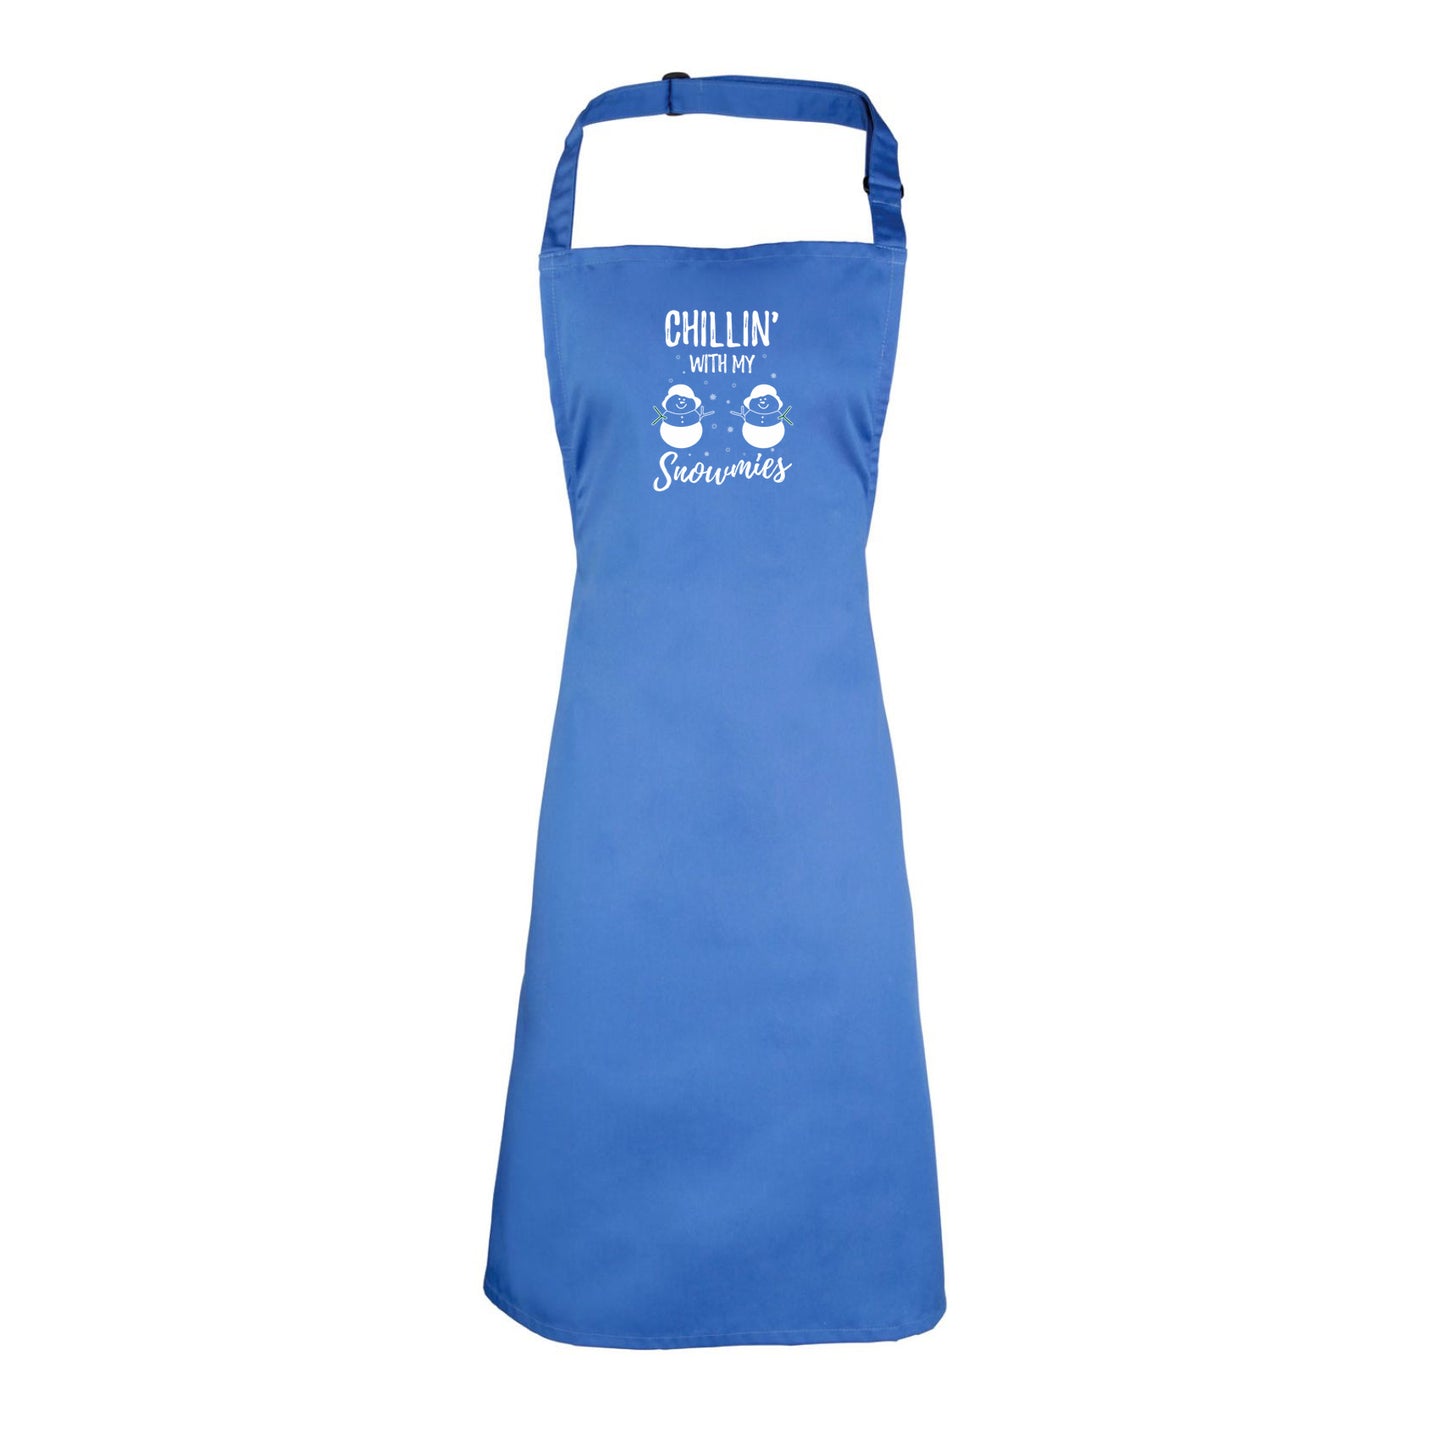 Chillin With My Snowmies Christmas Xmas - Funny Novelty Kitchen Apron